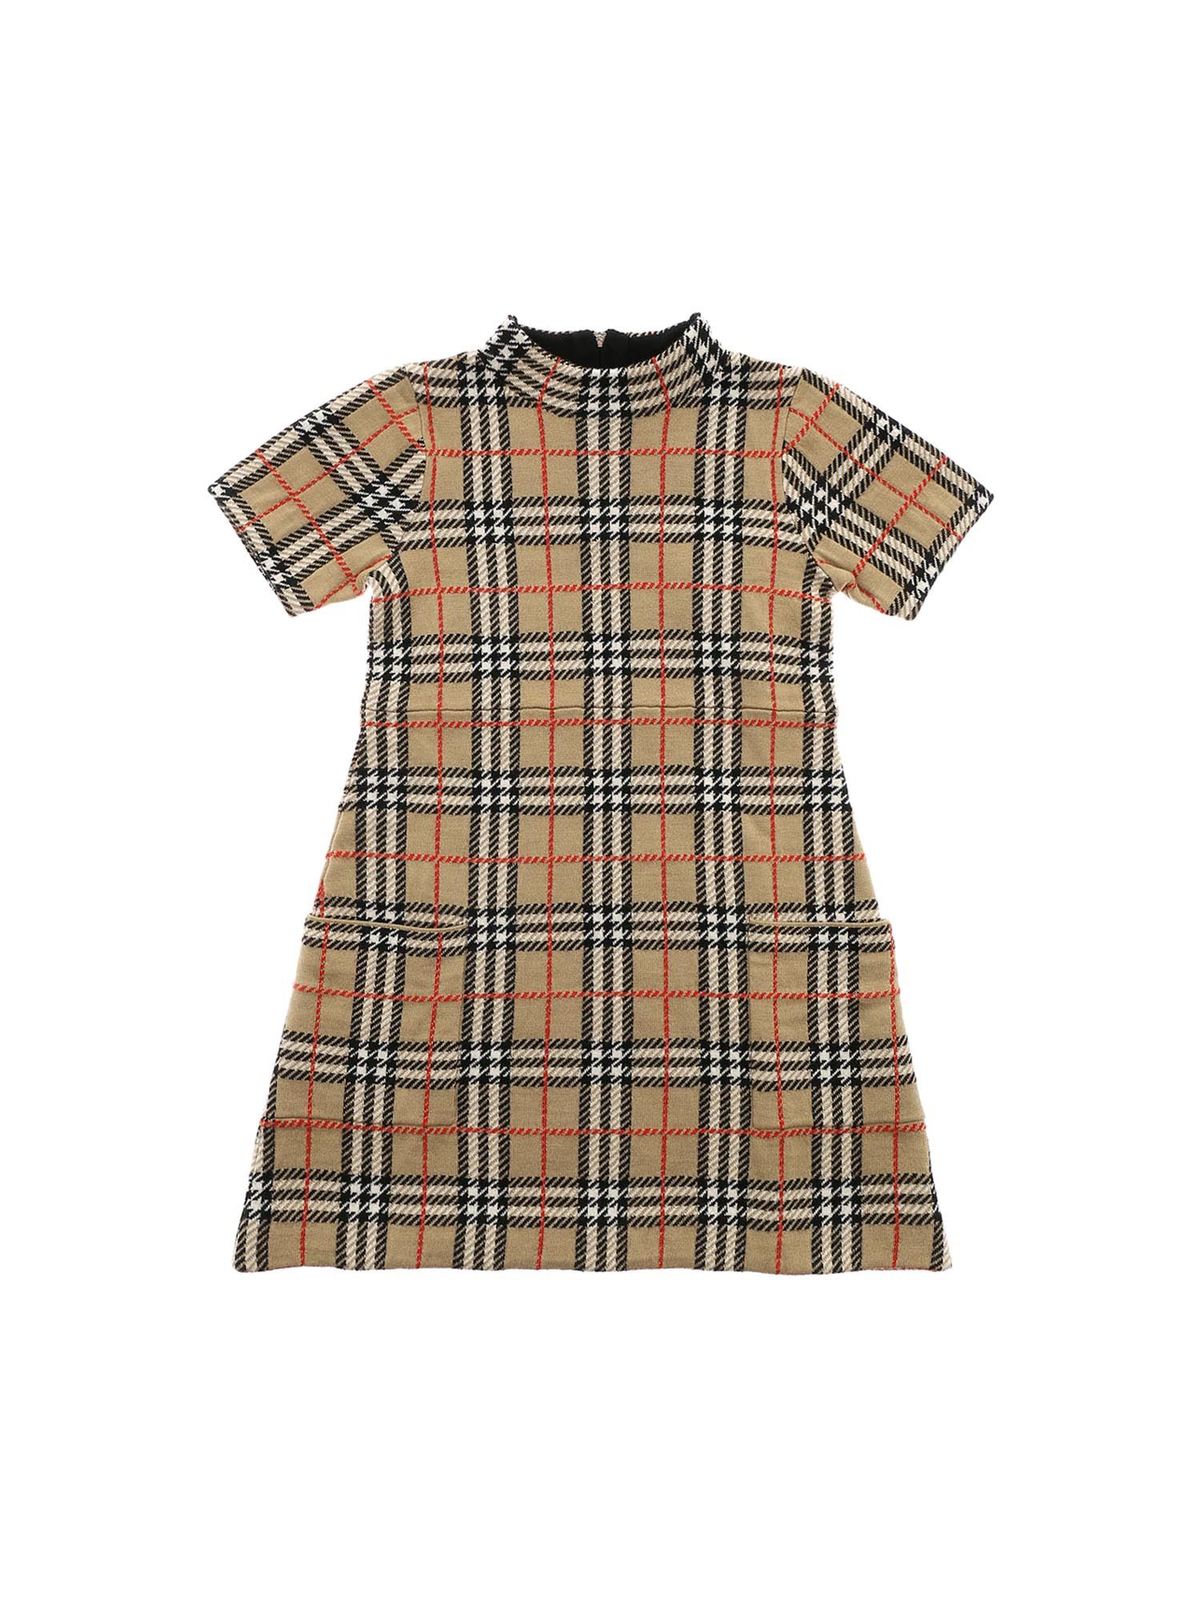 BURBERRY DENISE CHECK DRESS IN BEIGE